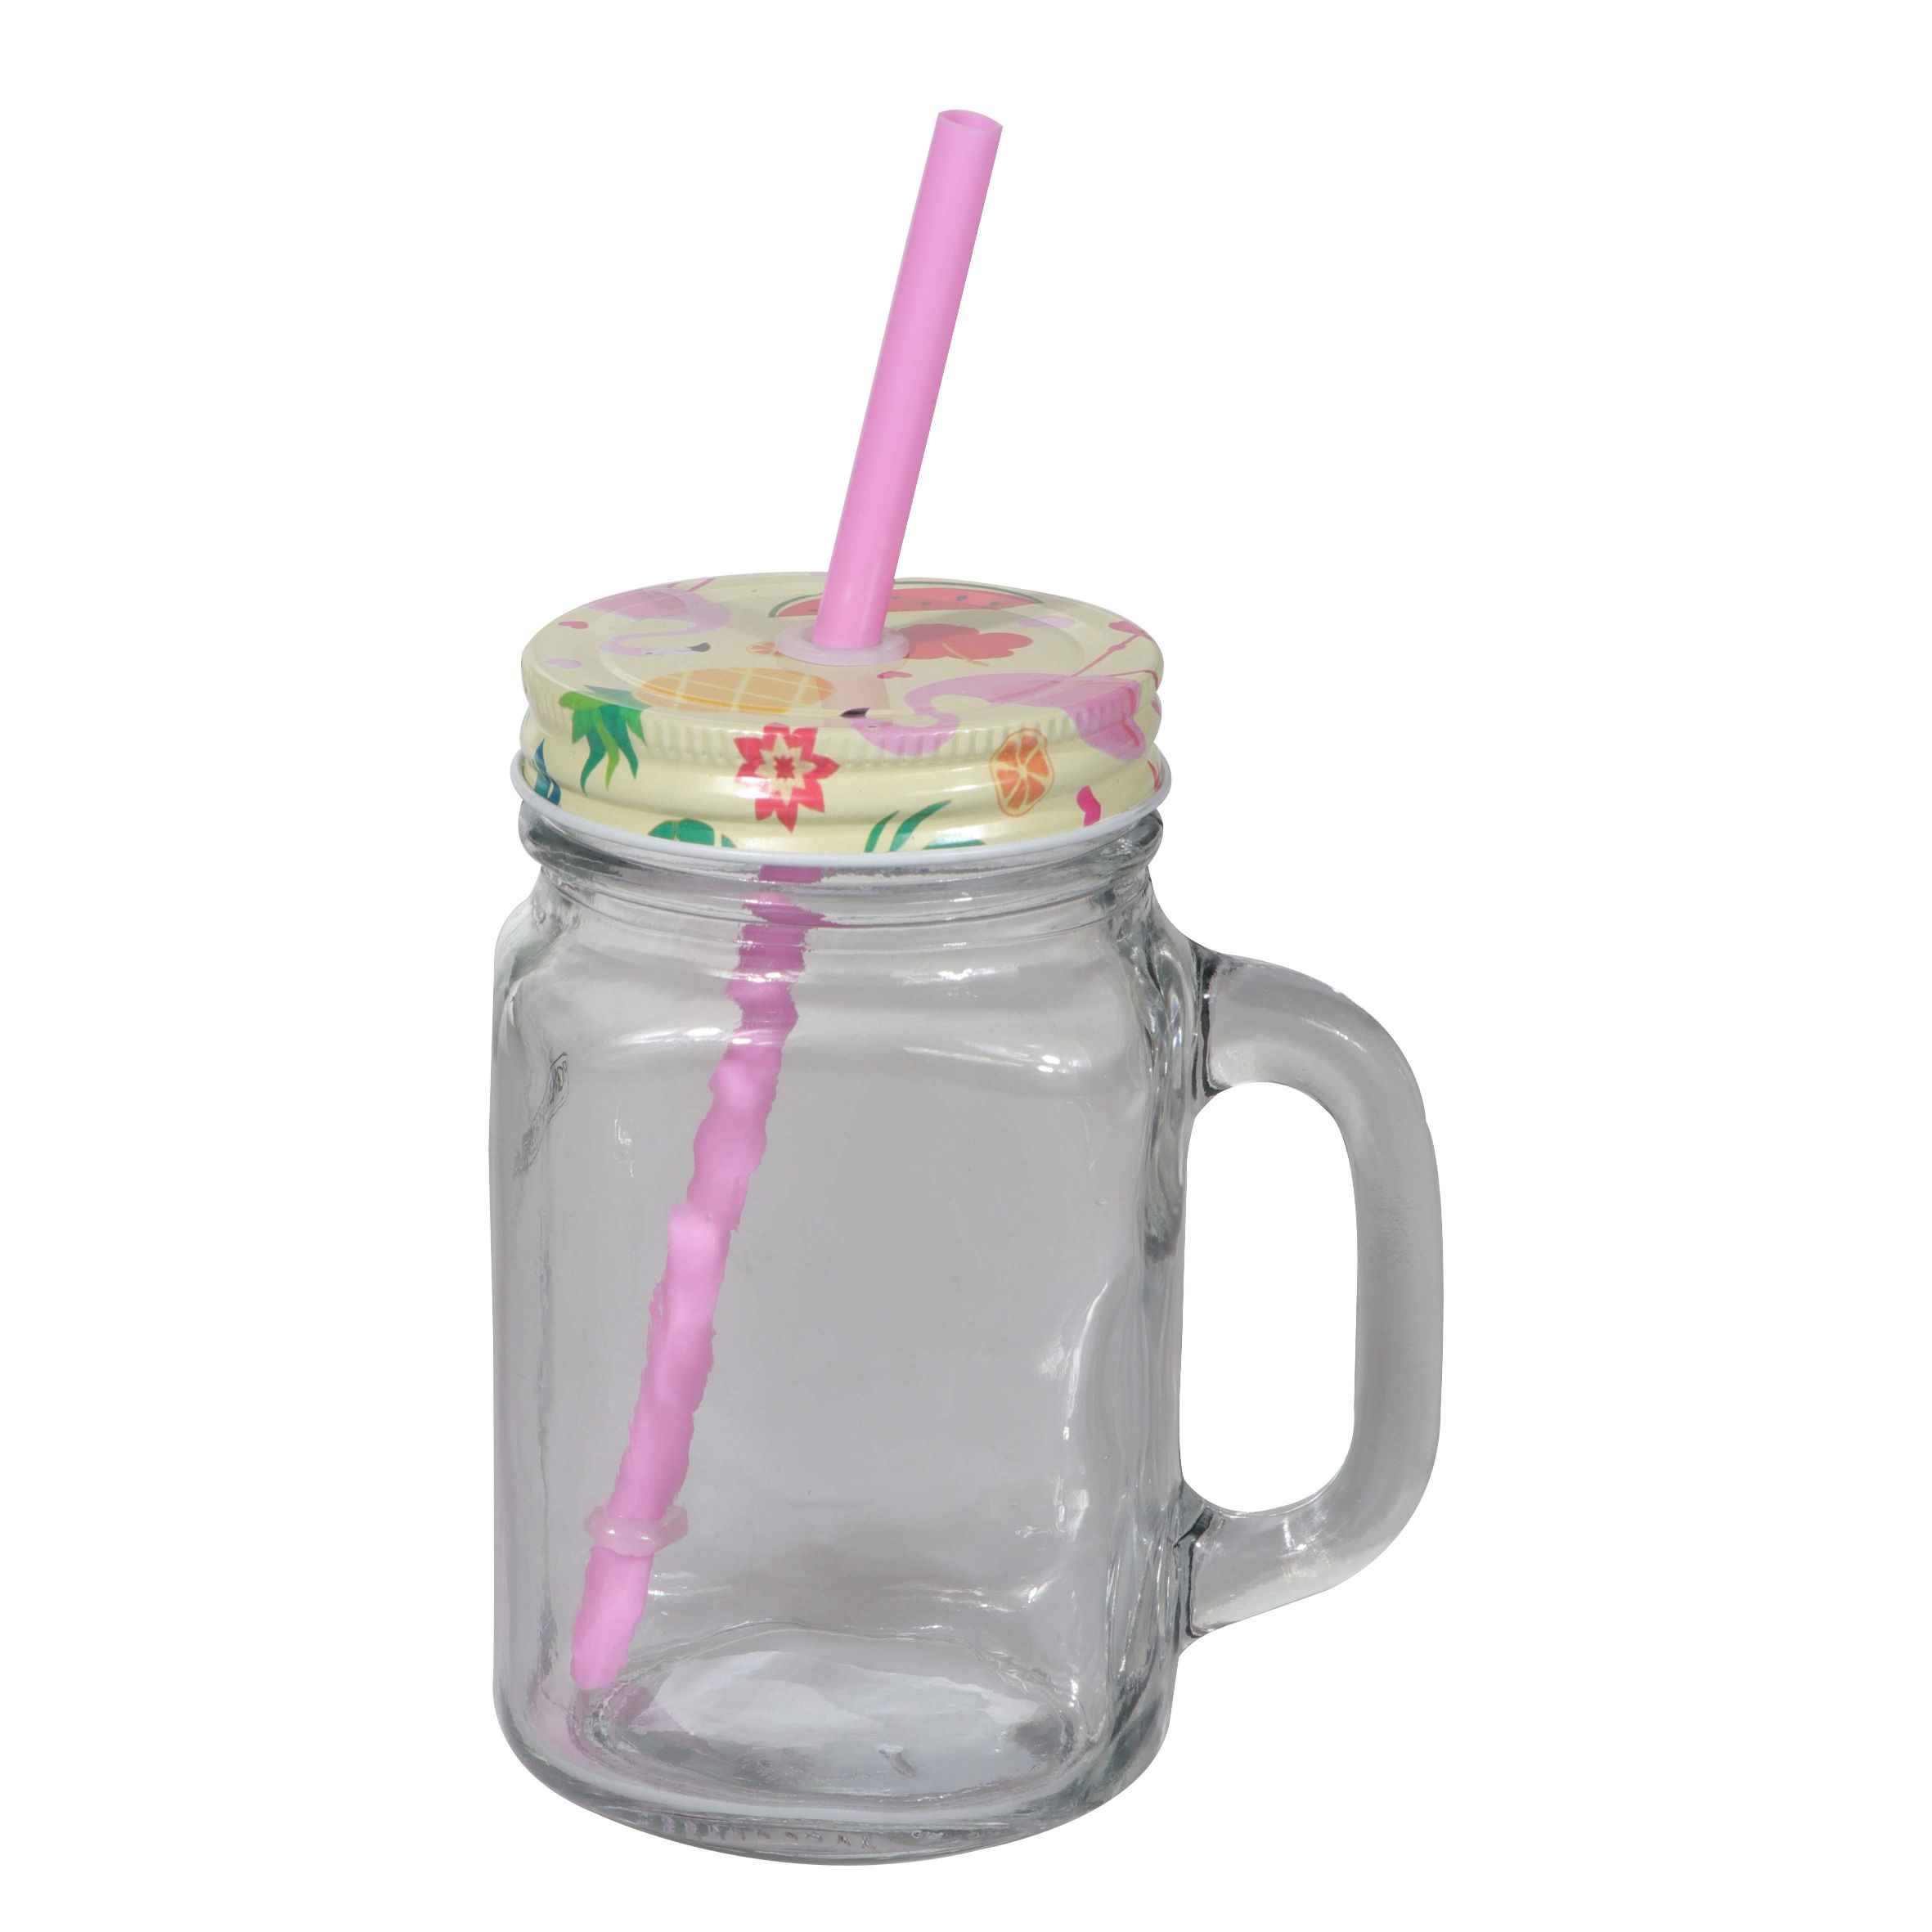 Royalford 500Ml Summer Time Mamsomn Jar - Clear Glass Wide Mouth With Lid & Straw | Drinking Jar Vintage Retro Garden Terrace | Ideal For Juice, Cocktails, Cold Coffee & Beverages